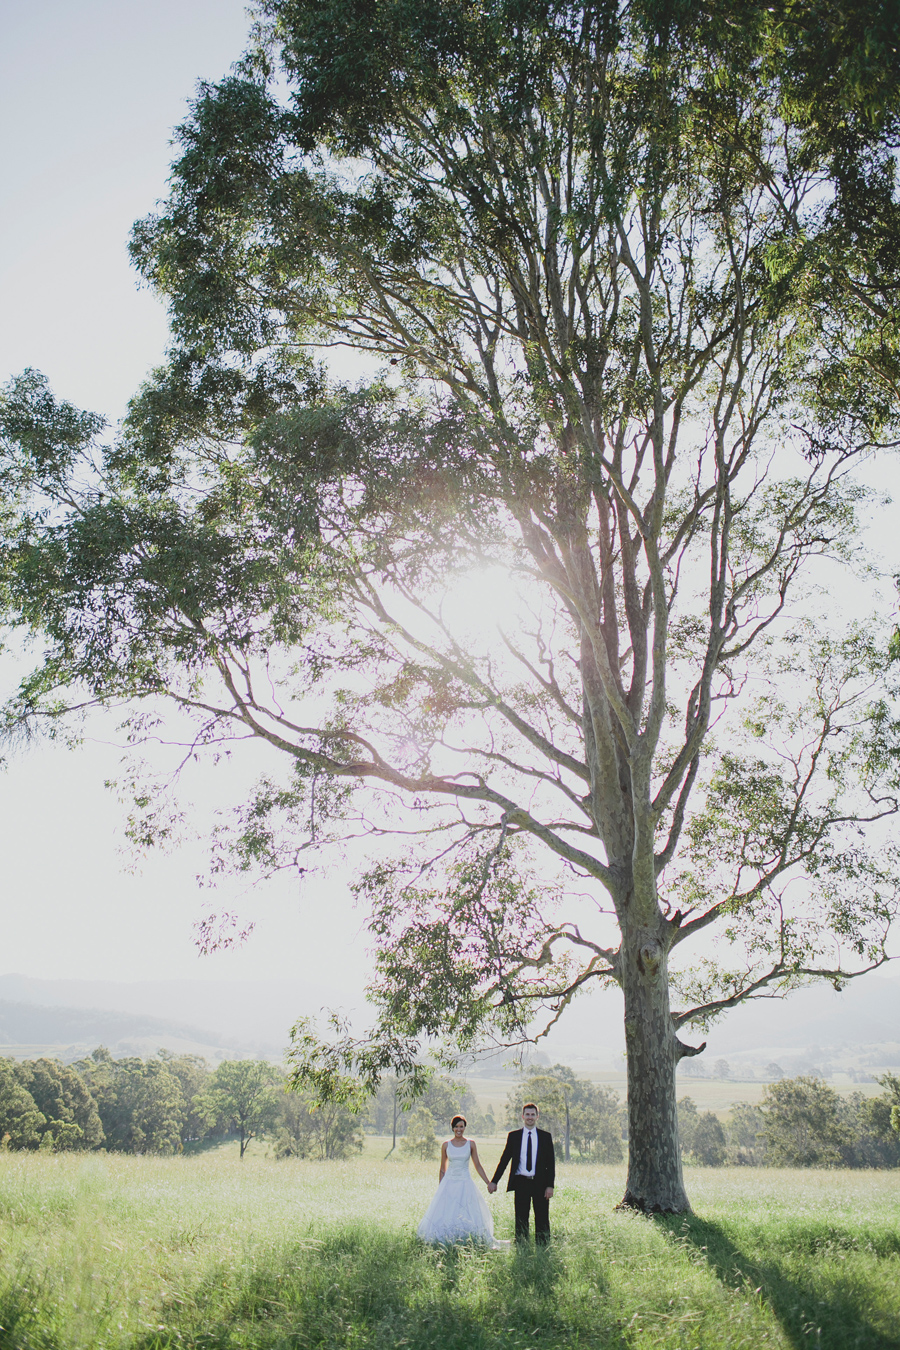 Chic Hunter Valley Wedding - Tim & Rhiannon by James Frost Photography